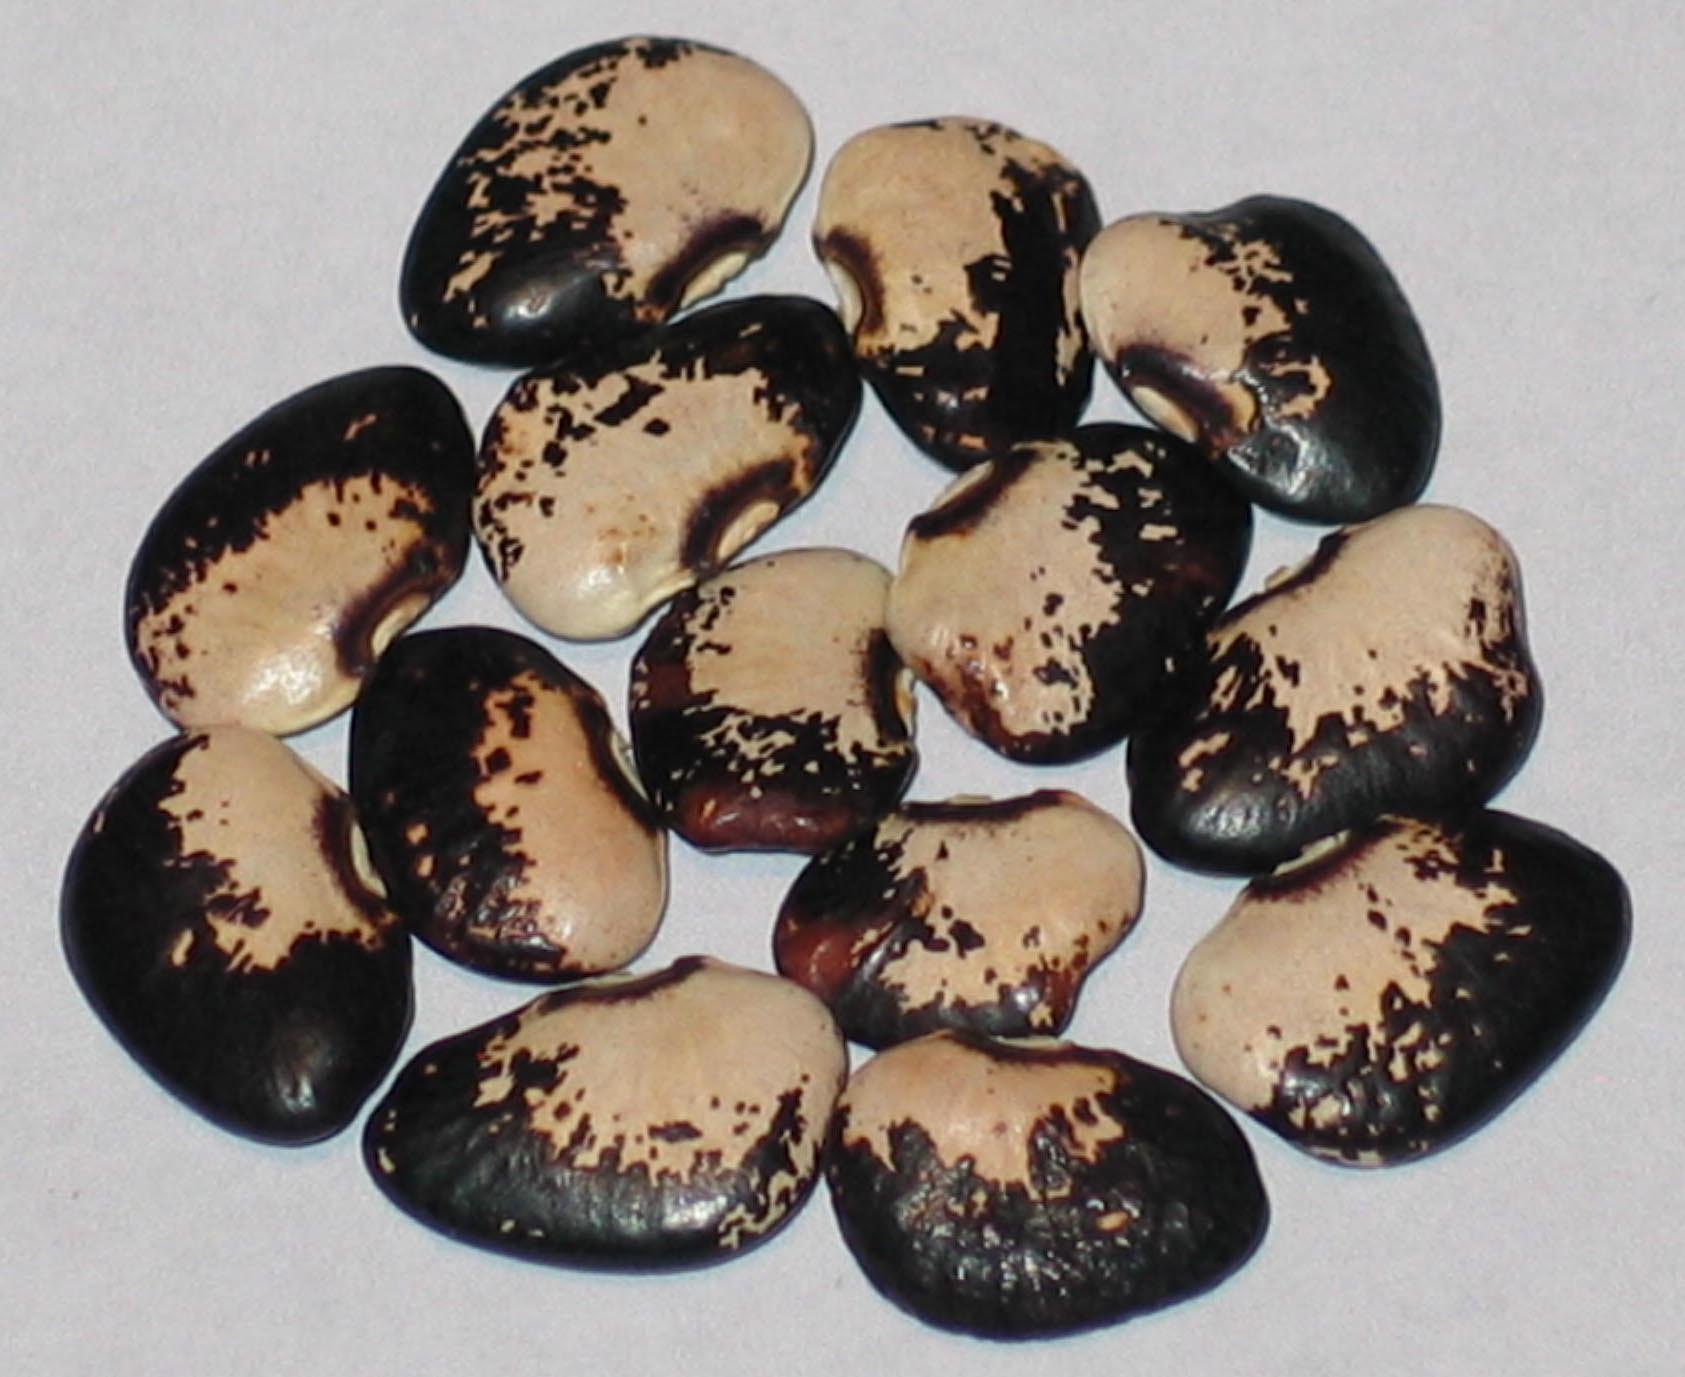 image of Cliff Dweller beans